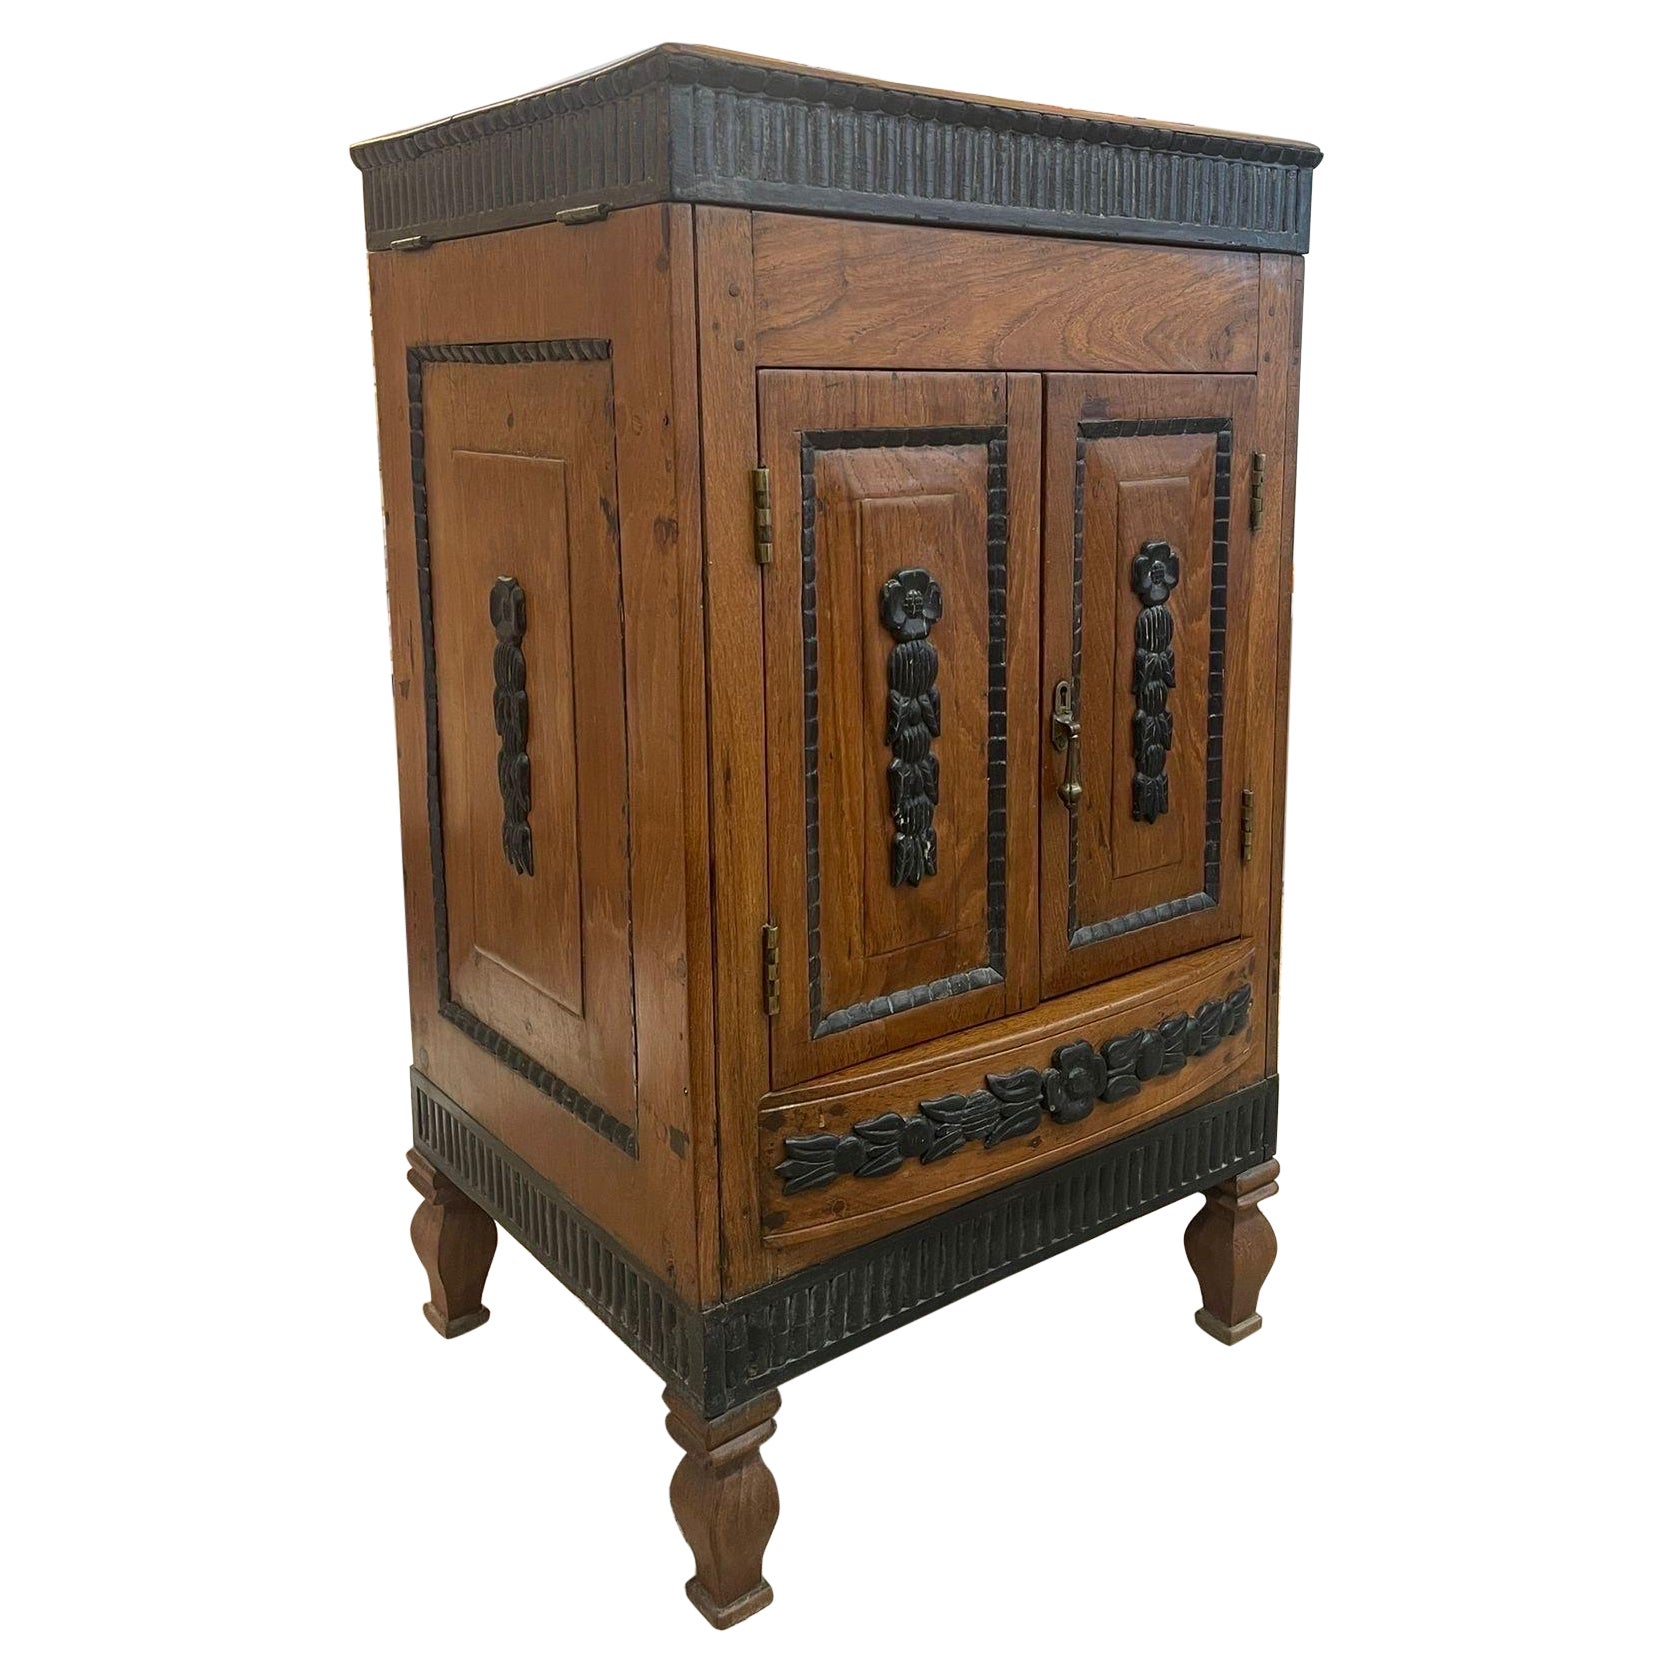 Vintage Dutch Colonial Style Cabinet With Carved Wood Accents. For Sale